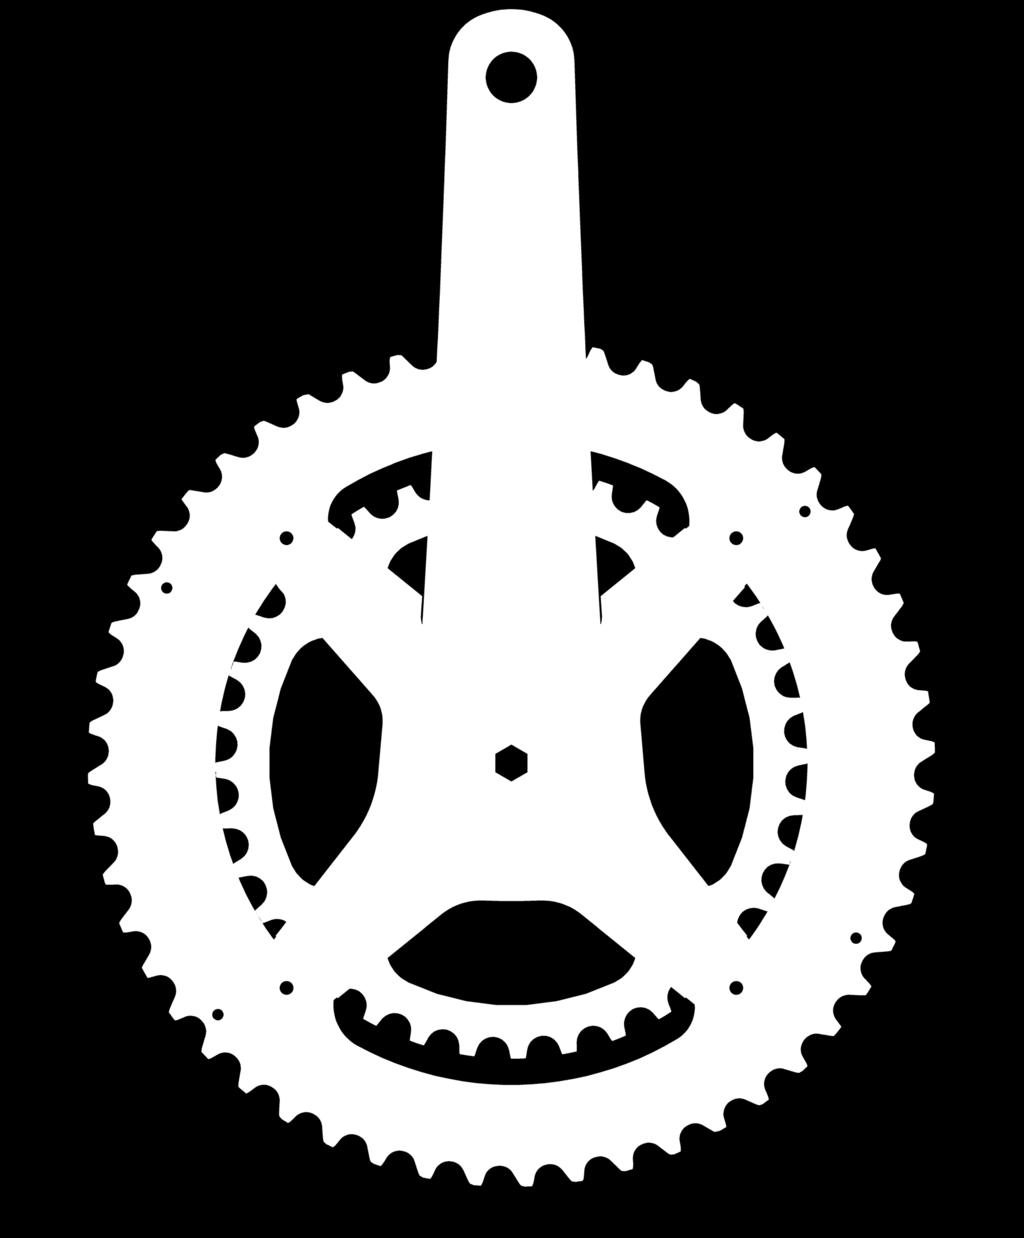 position shown at the right, the chain may contact